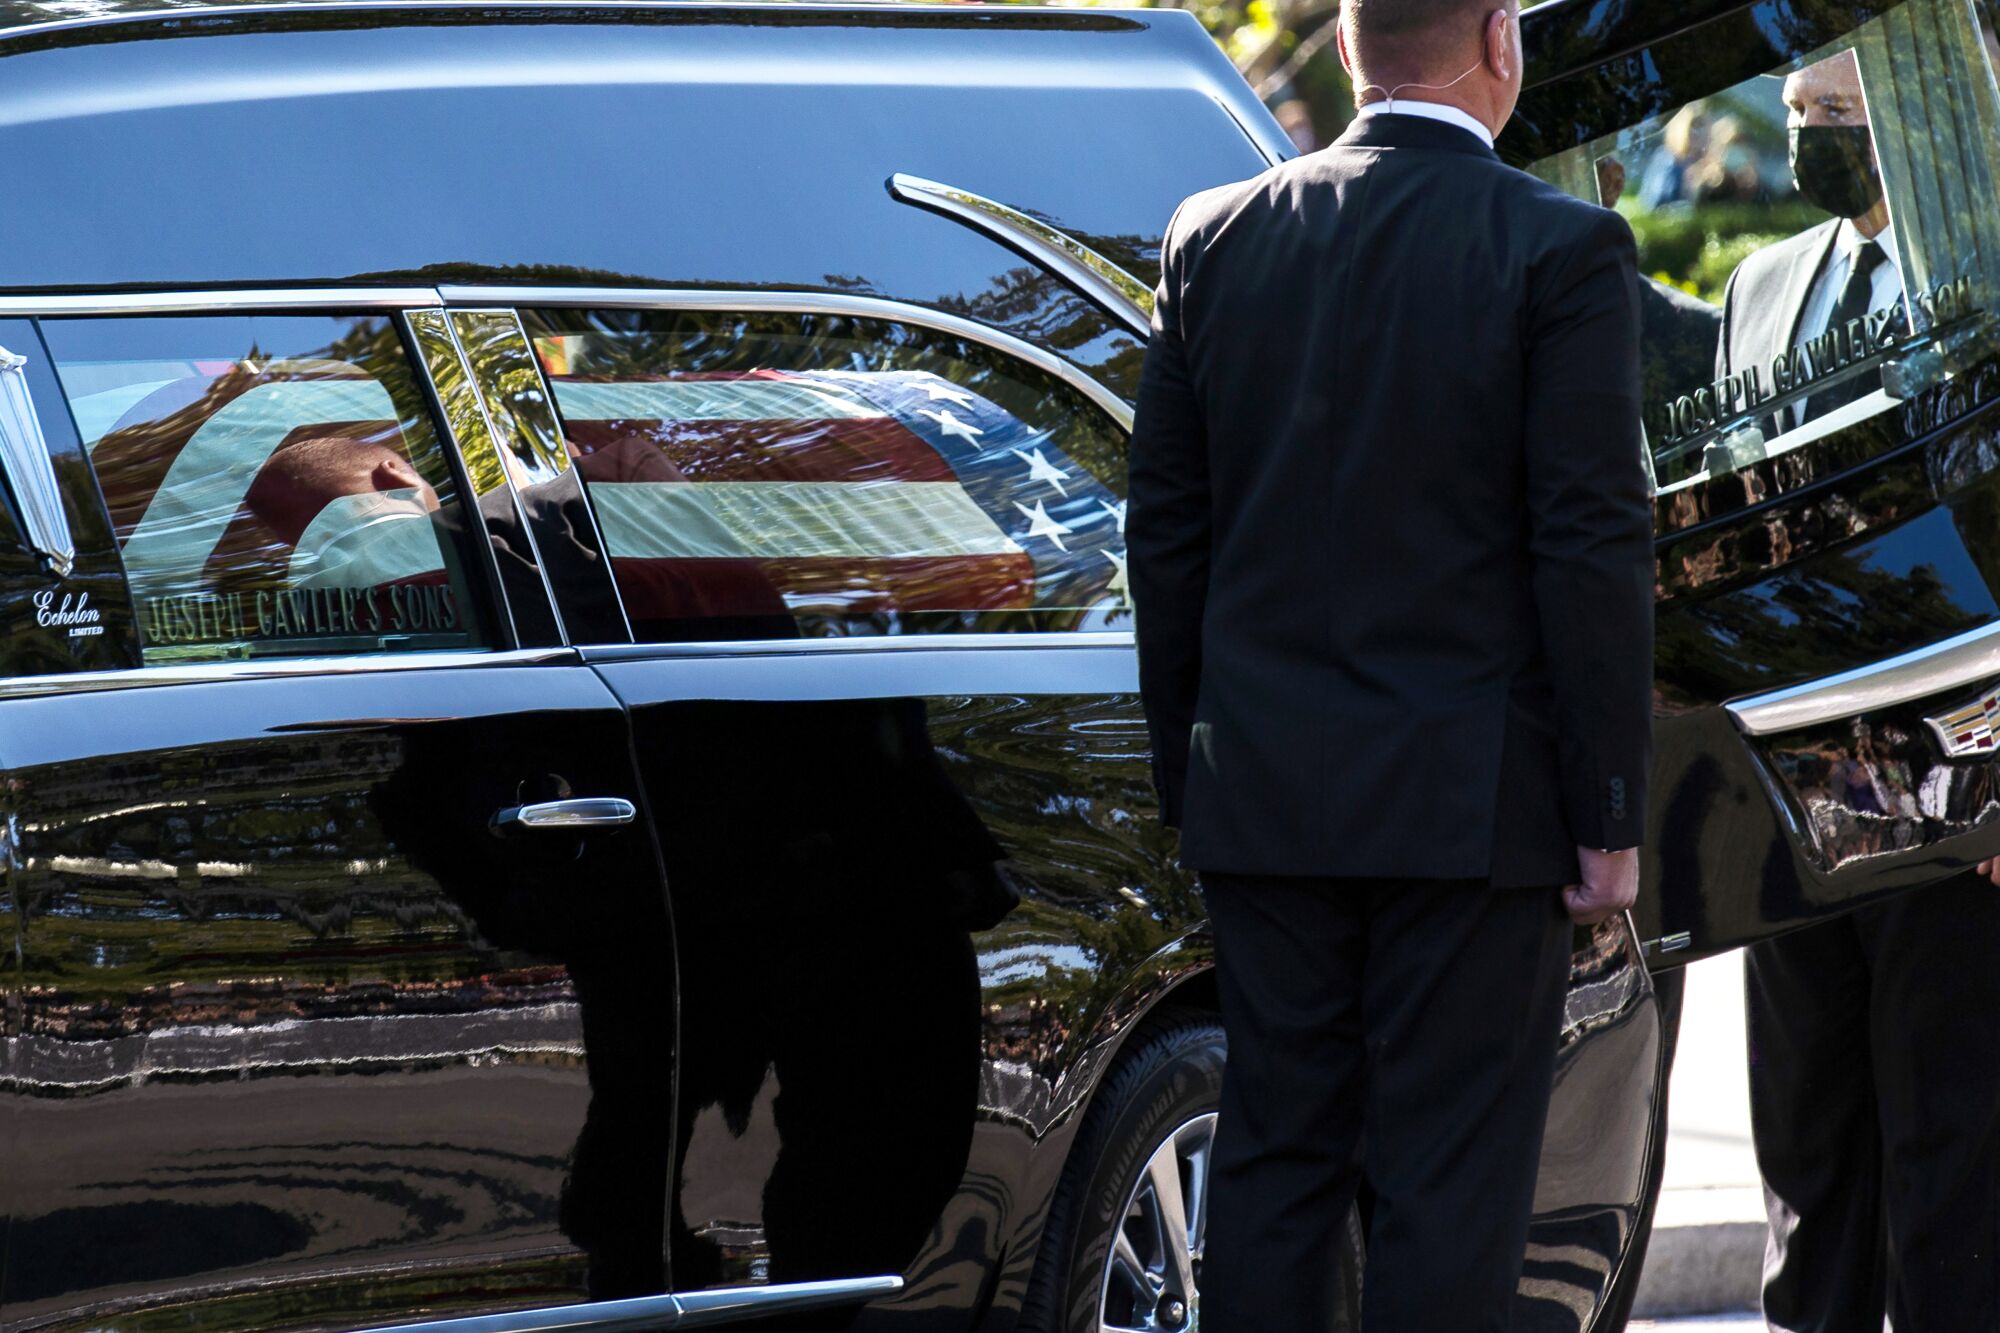 The flag-draped casket of Justice Ruth Bader Ginsburg arrives at the Supreme Court in Washington, D.C.